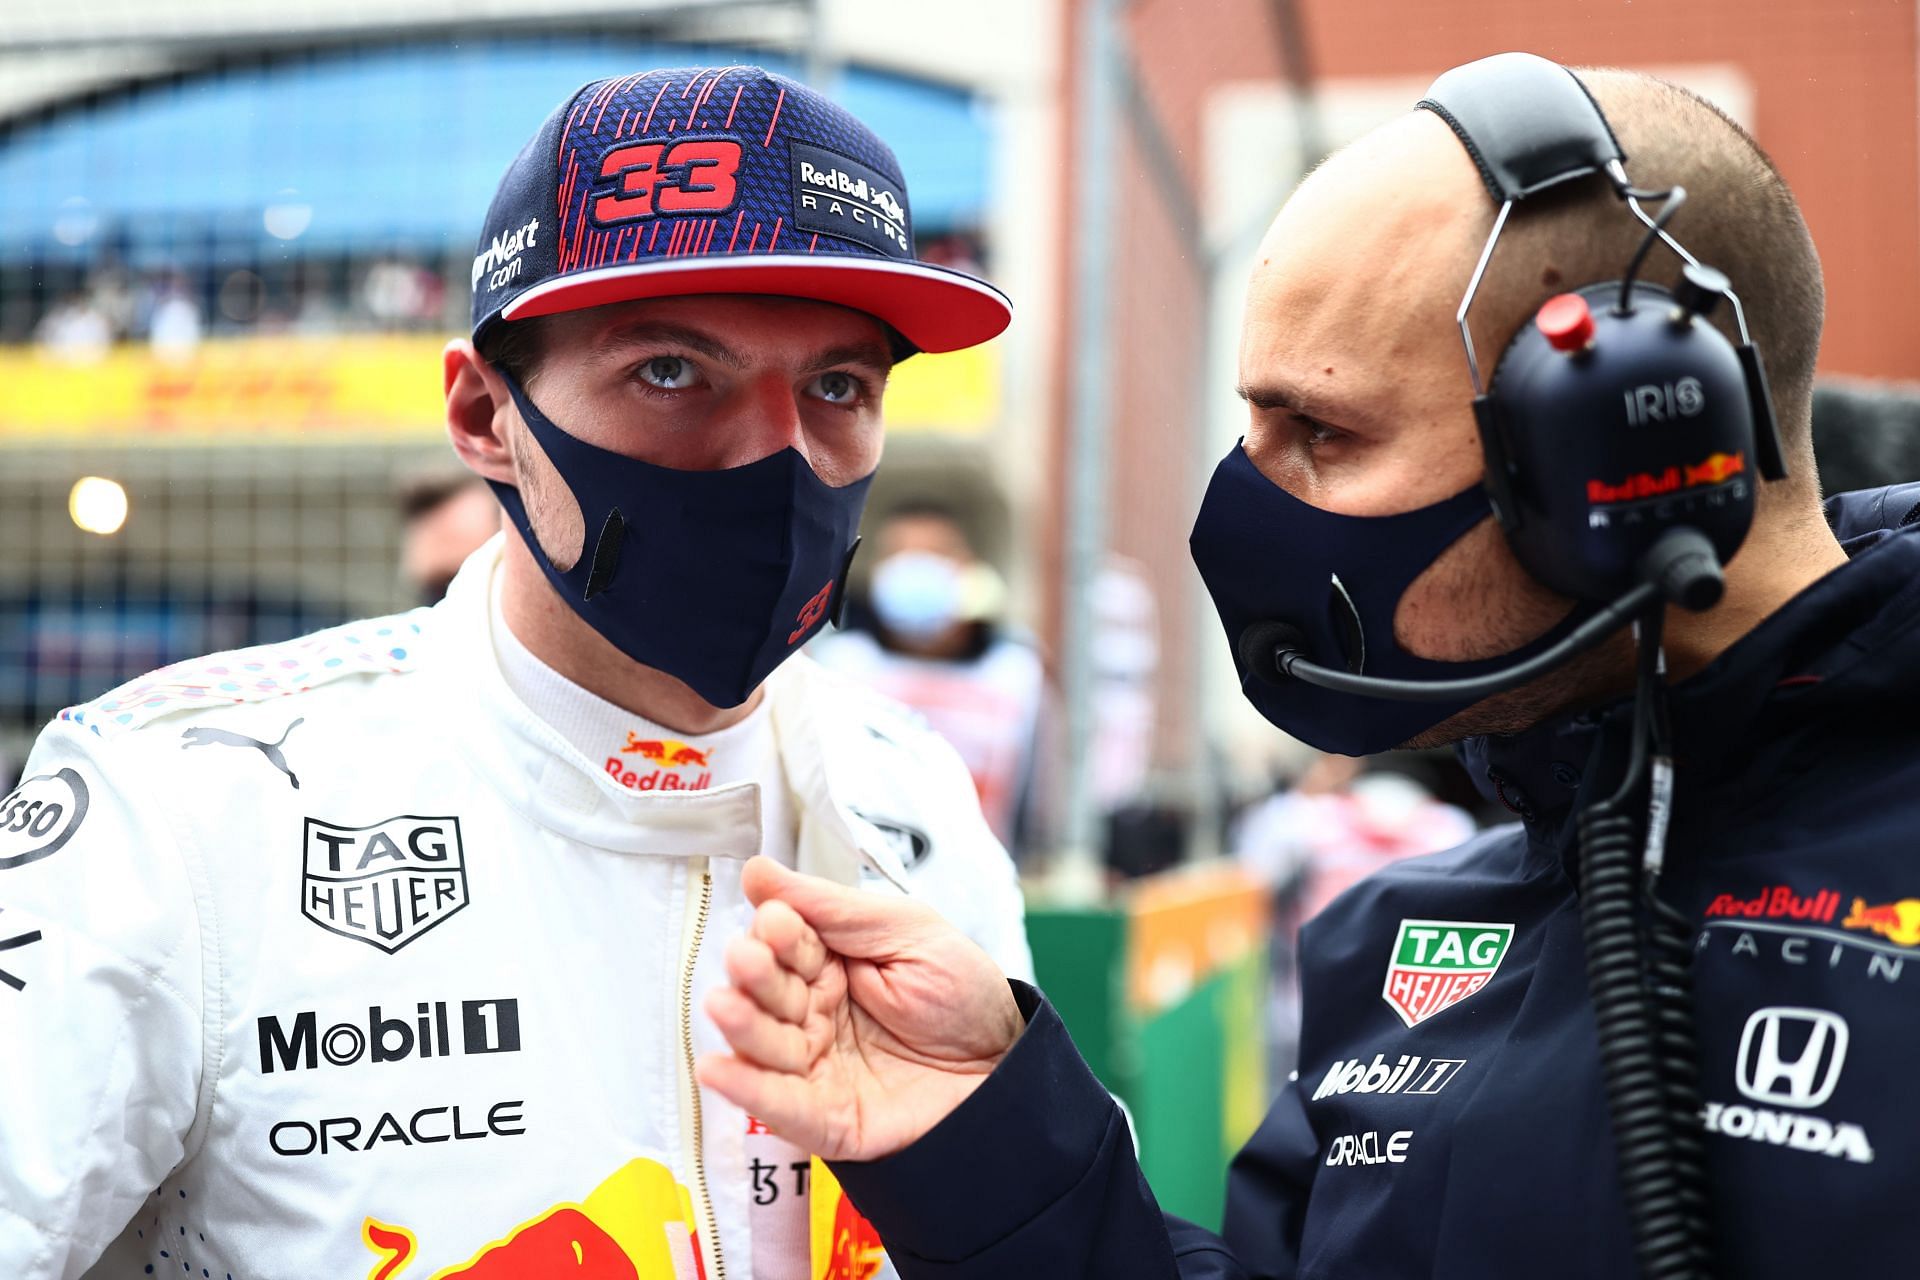 F1 Grand Prix of Turkey - Max Verstappen discusses race strategy with Gianpiero Lambiase (right)